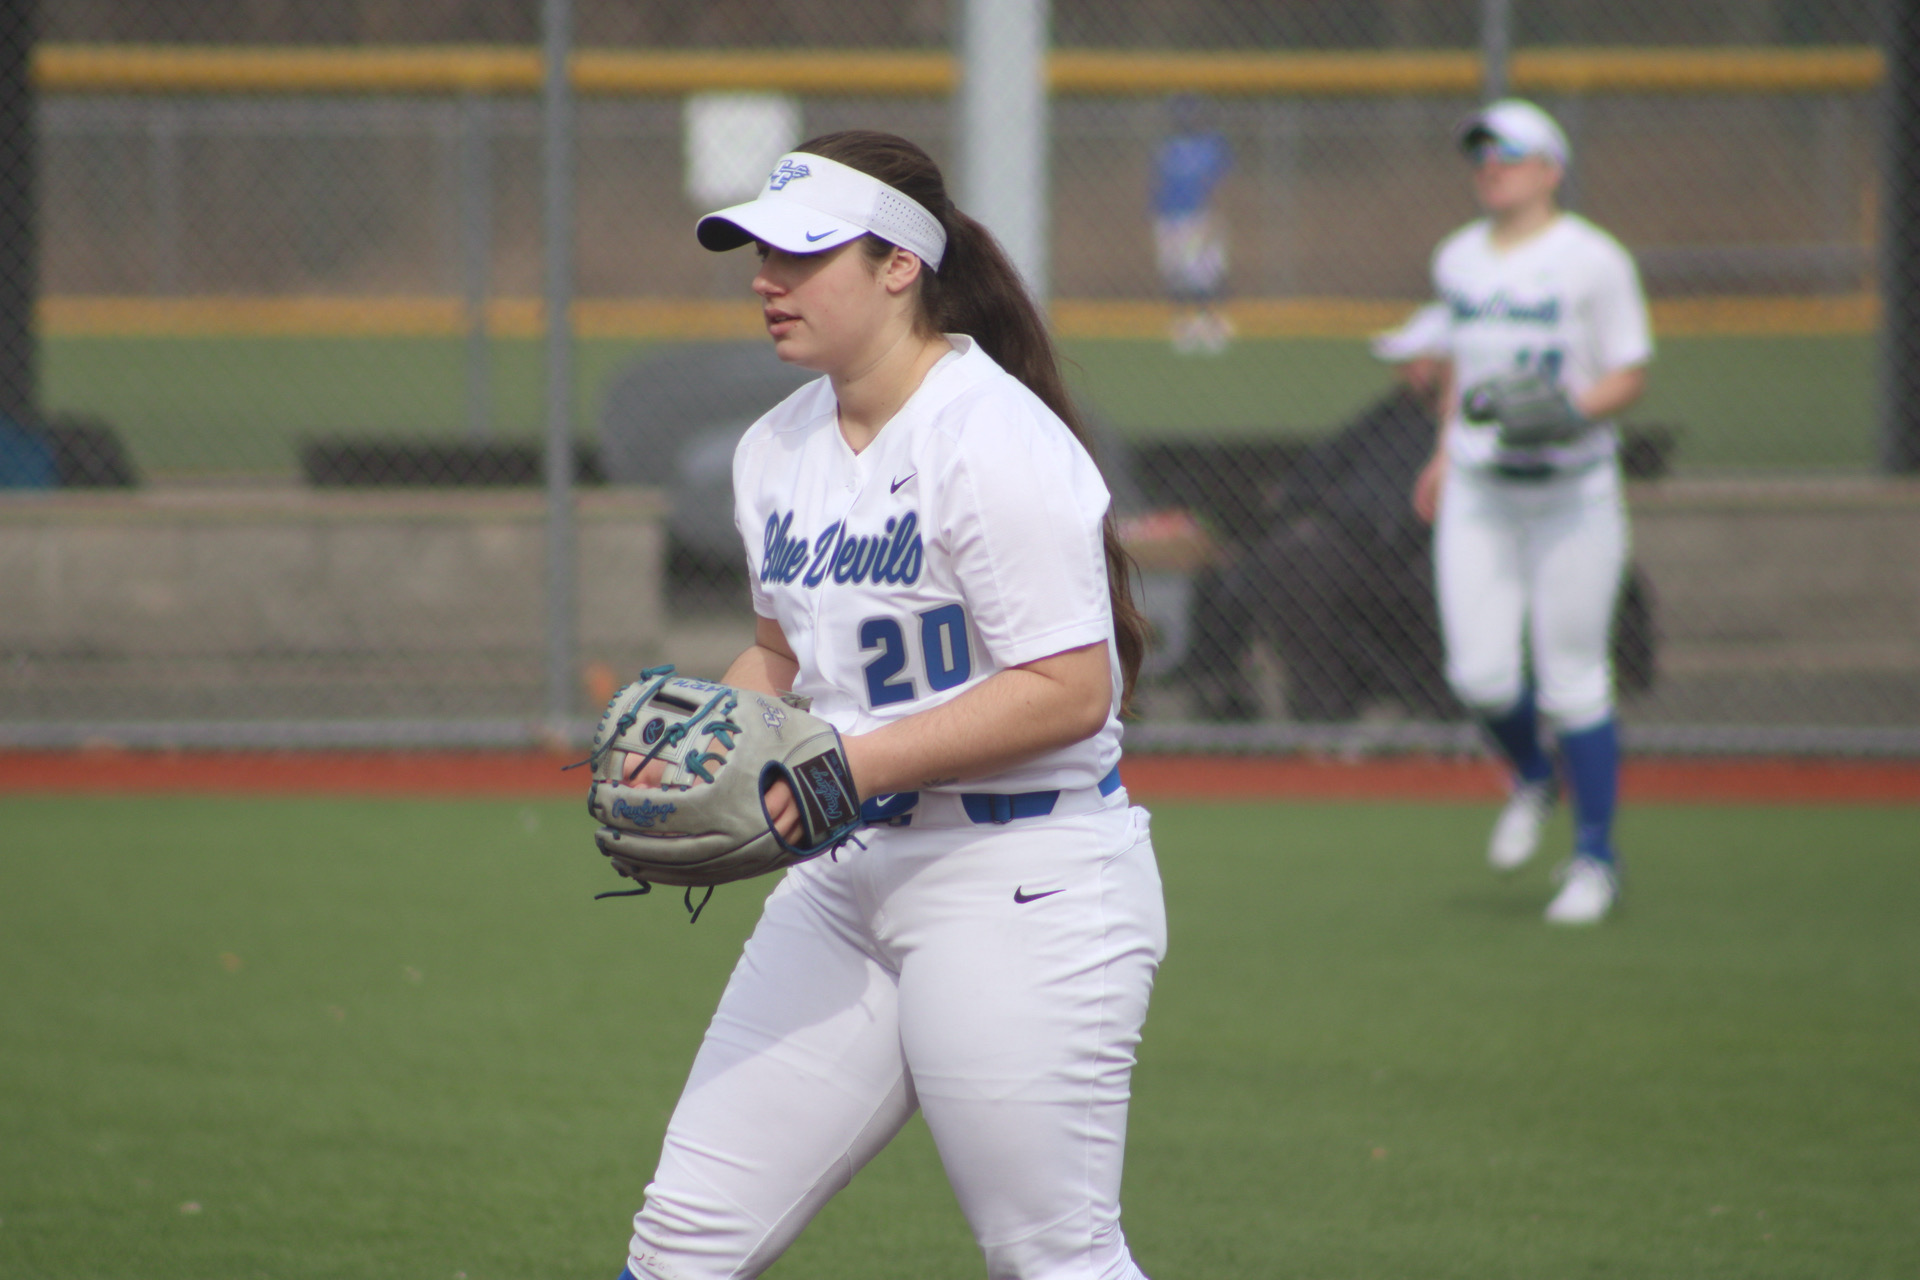 Softball Falls to Marist in First Loss of the Season